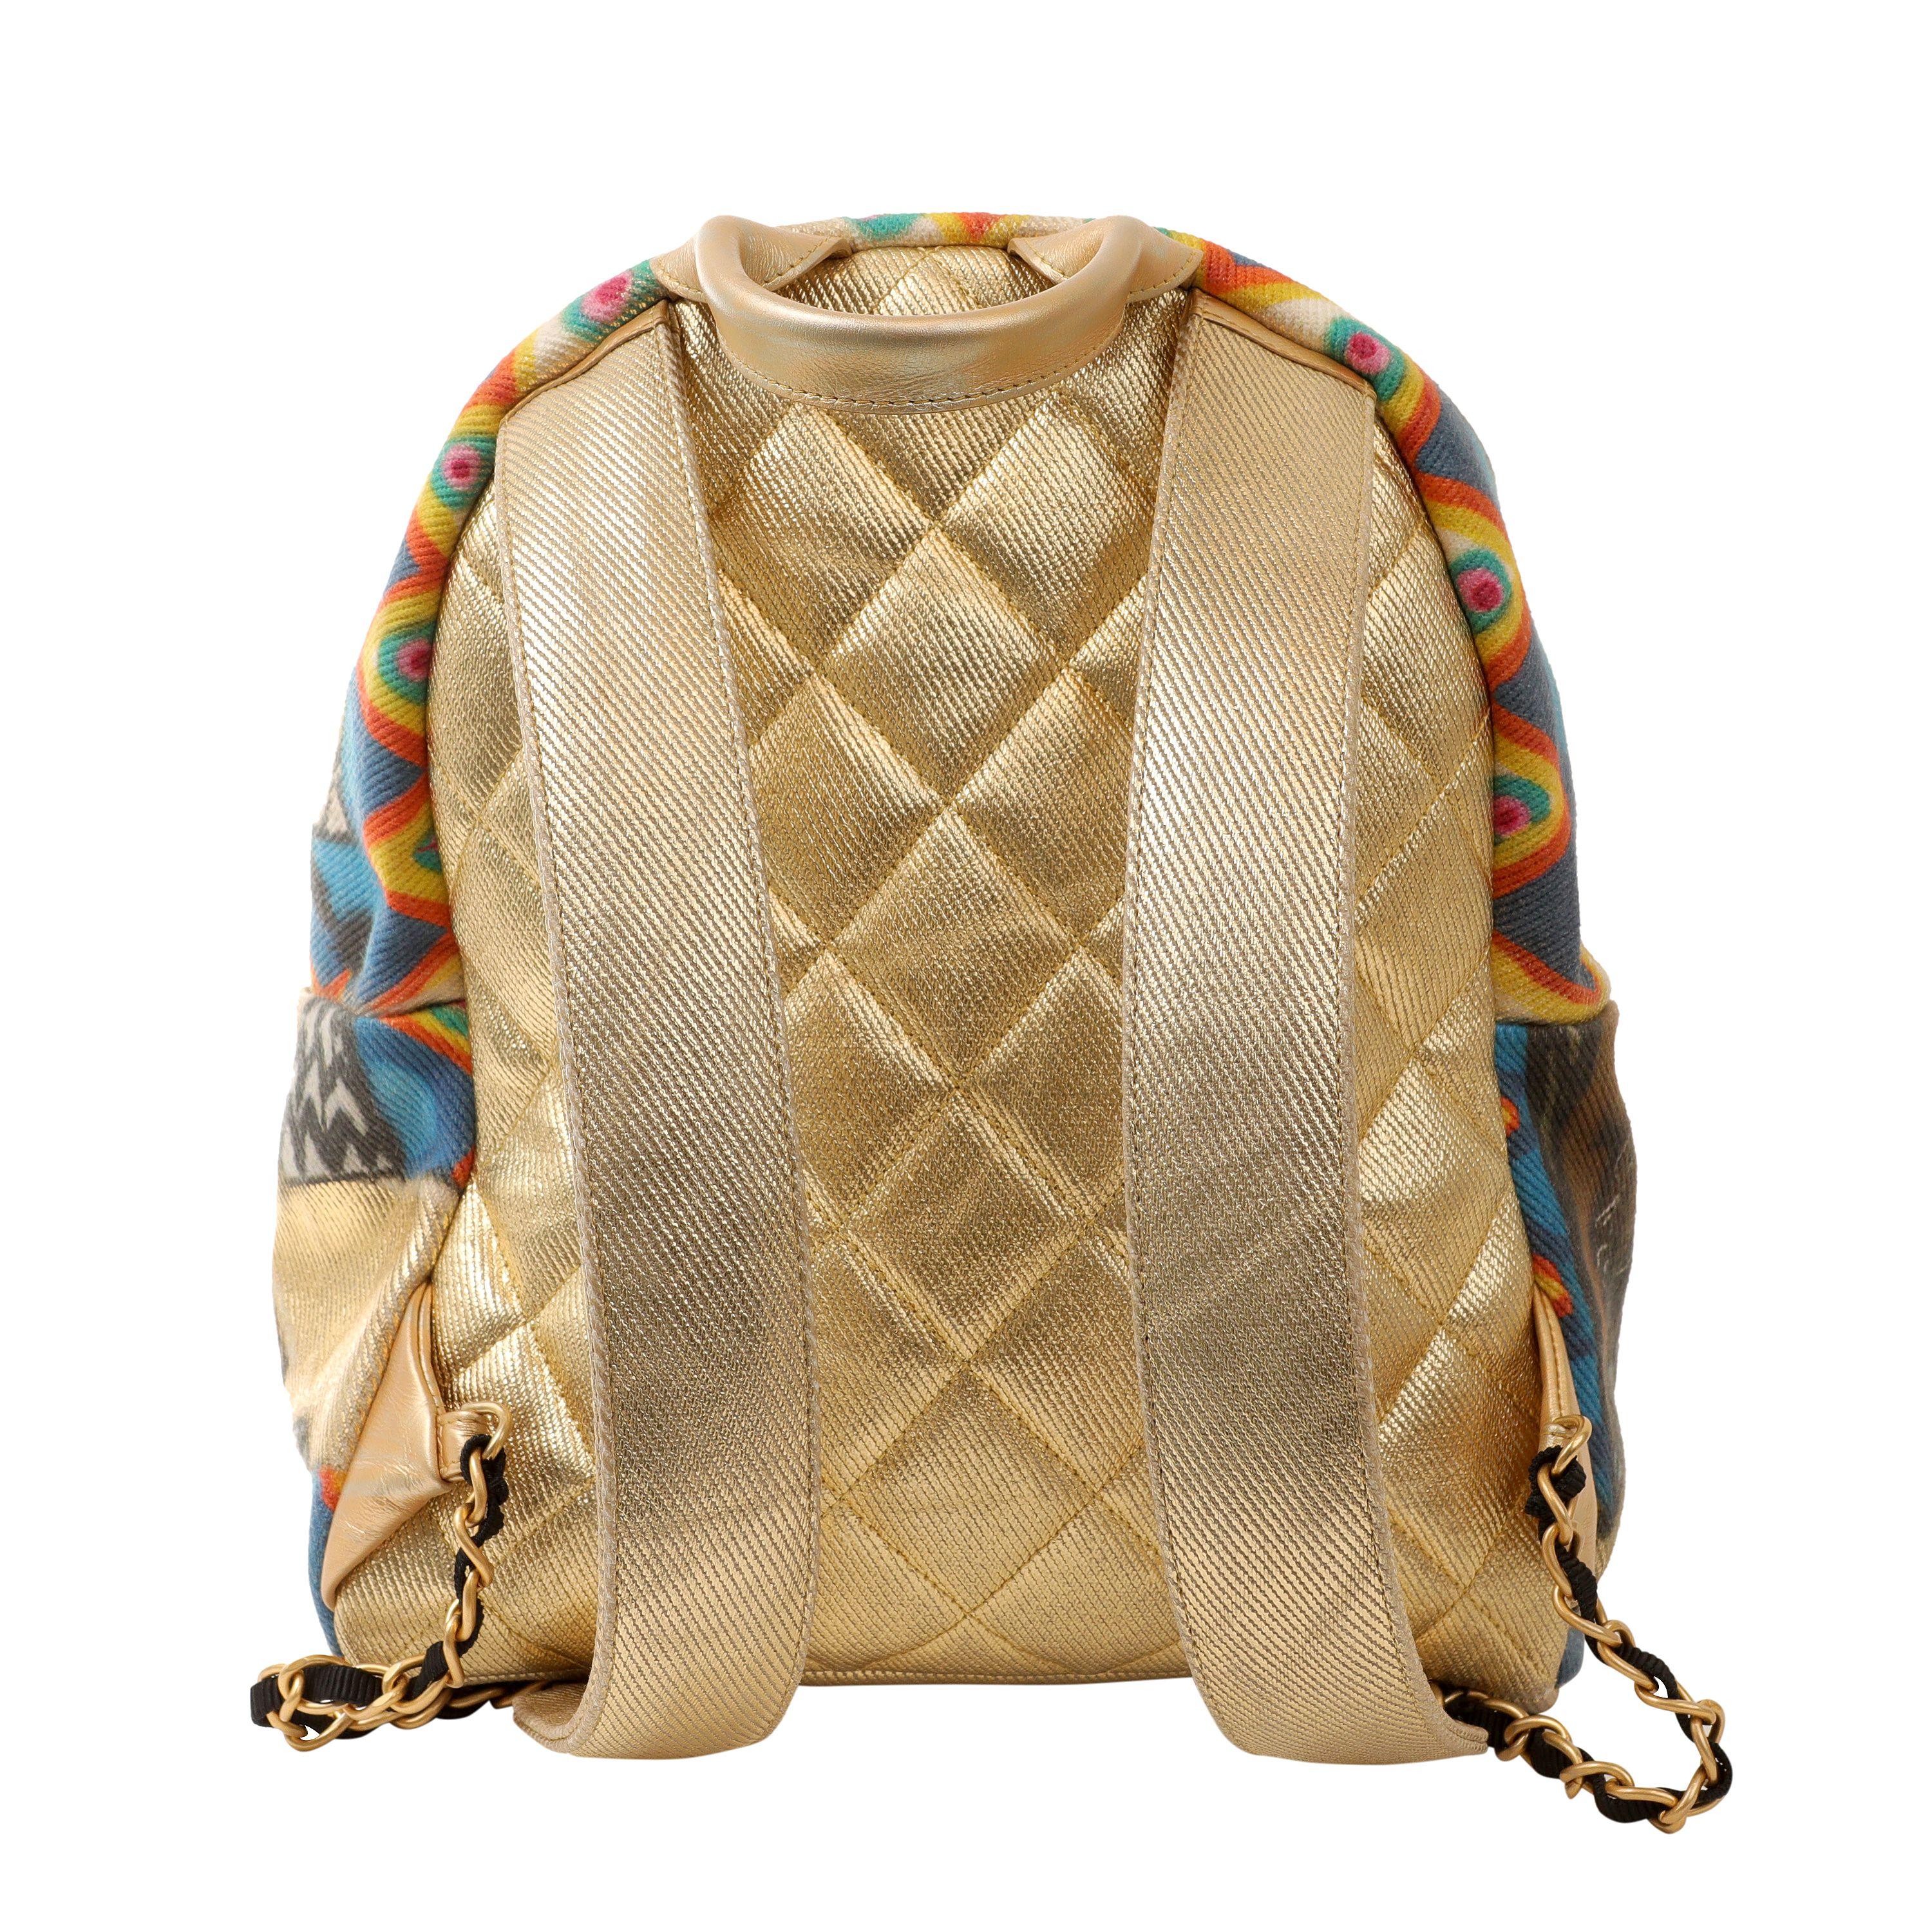 This authentic Chanel Gold Graffiti Street Spirit Backpack is in pristine condition.  Gold fabric unisex backpack with spray paint effect graffiti design.  Zippered front pouch with gold interlocking CC zipper pull charm.  Large double zippered